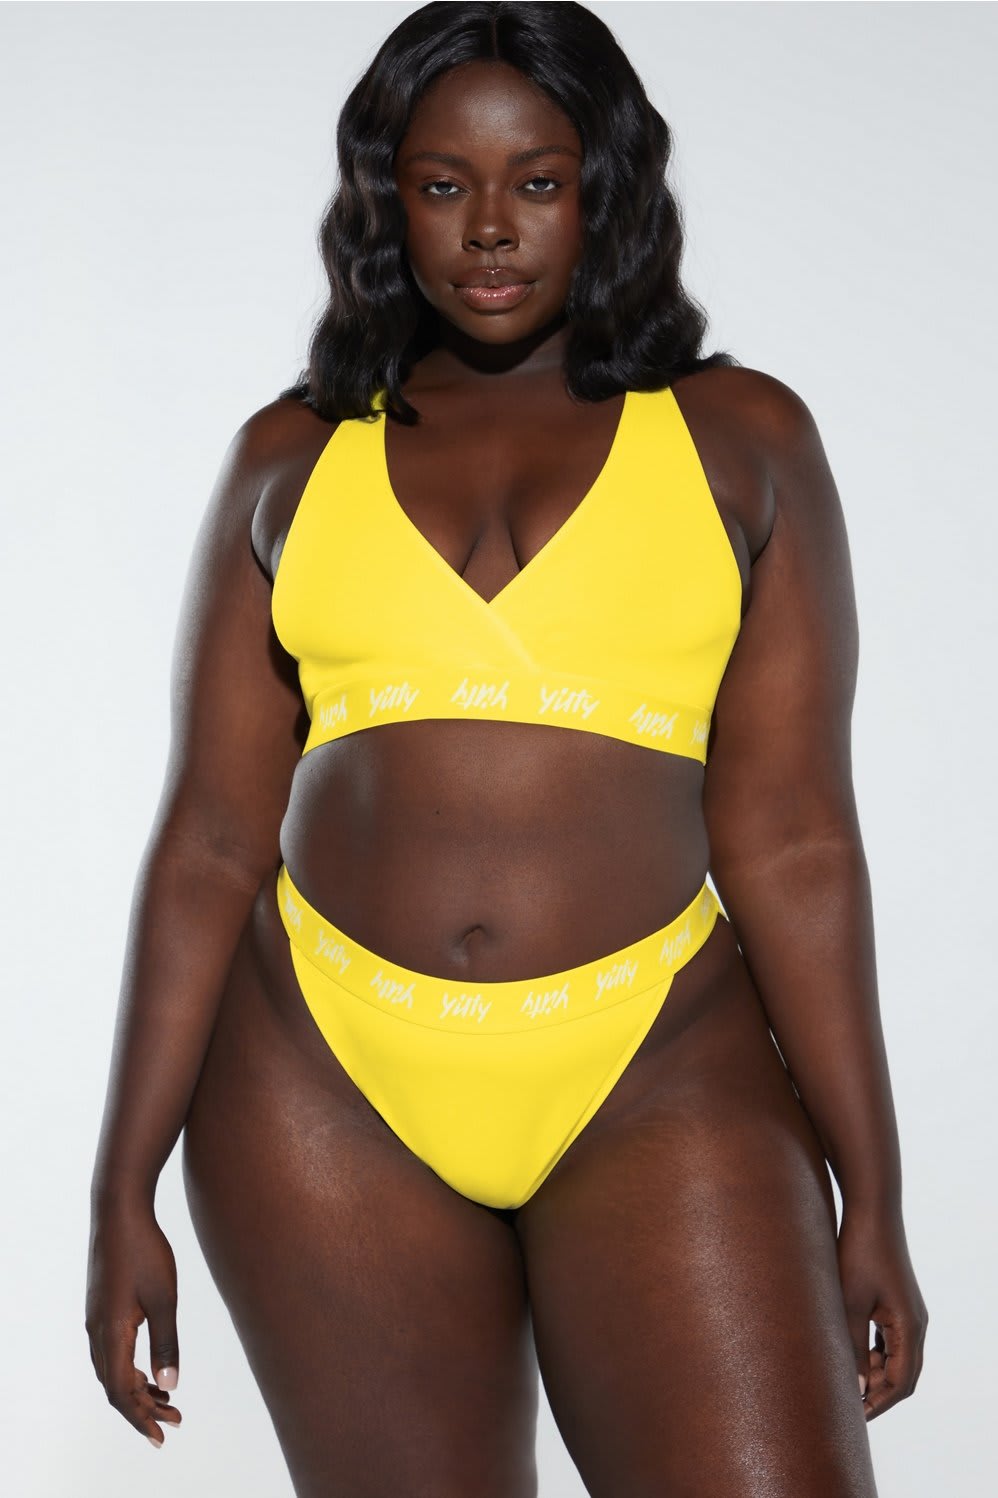 Have y'all heard about Lizzo's new shapewear line @YITTY @lizzo ? #yi